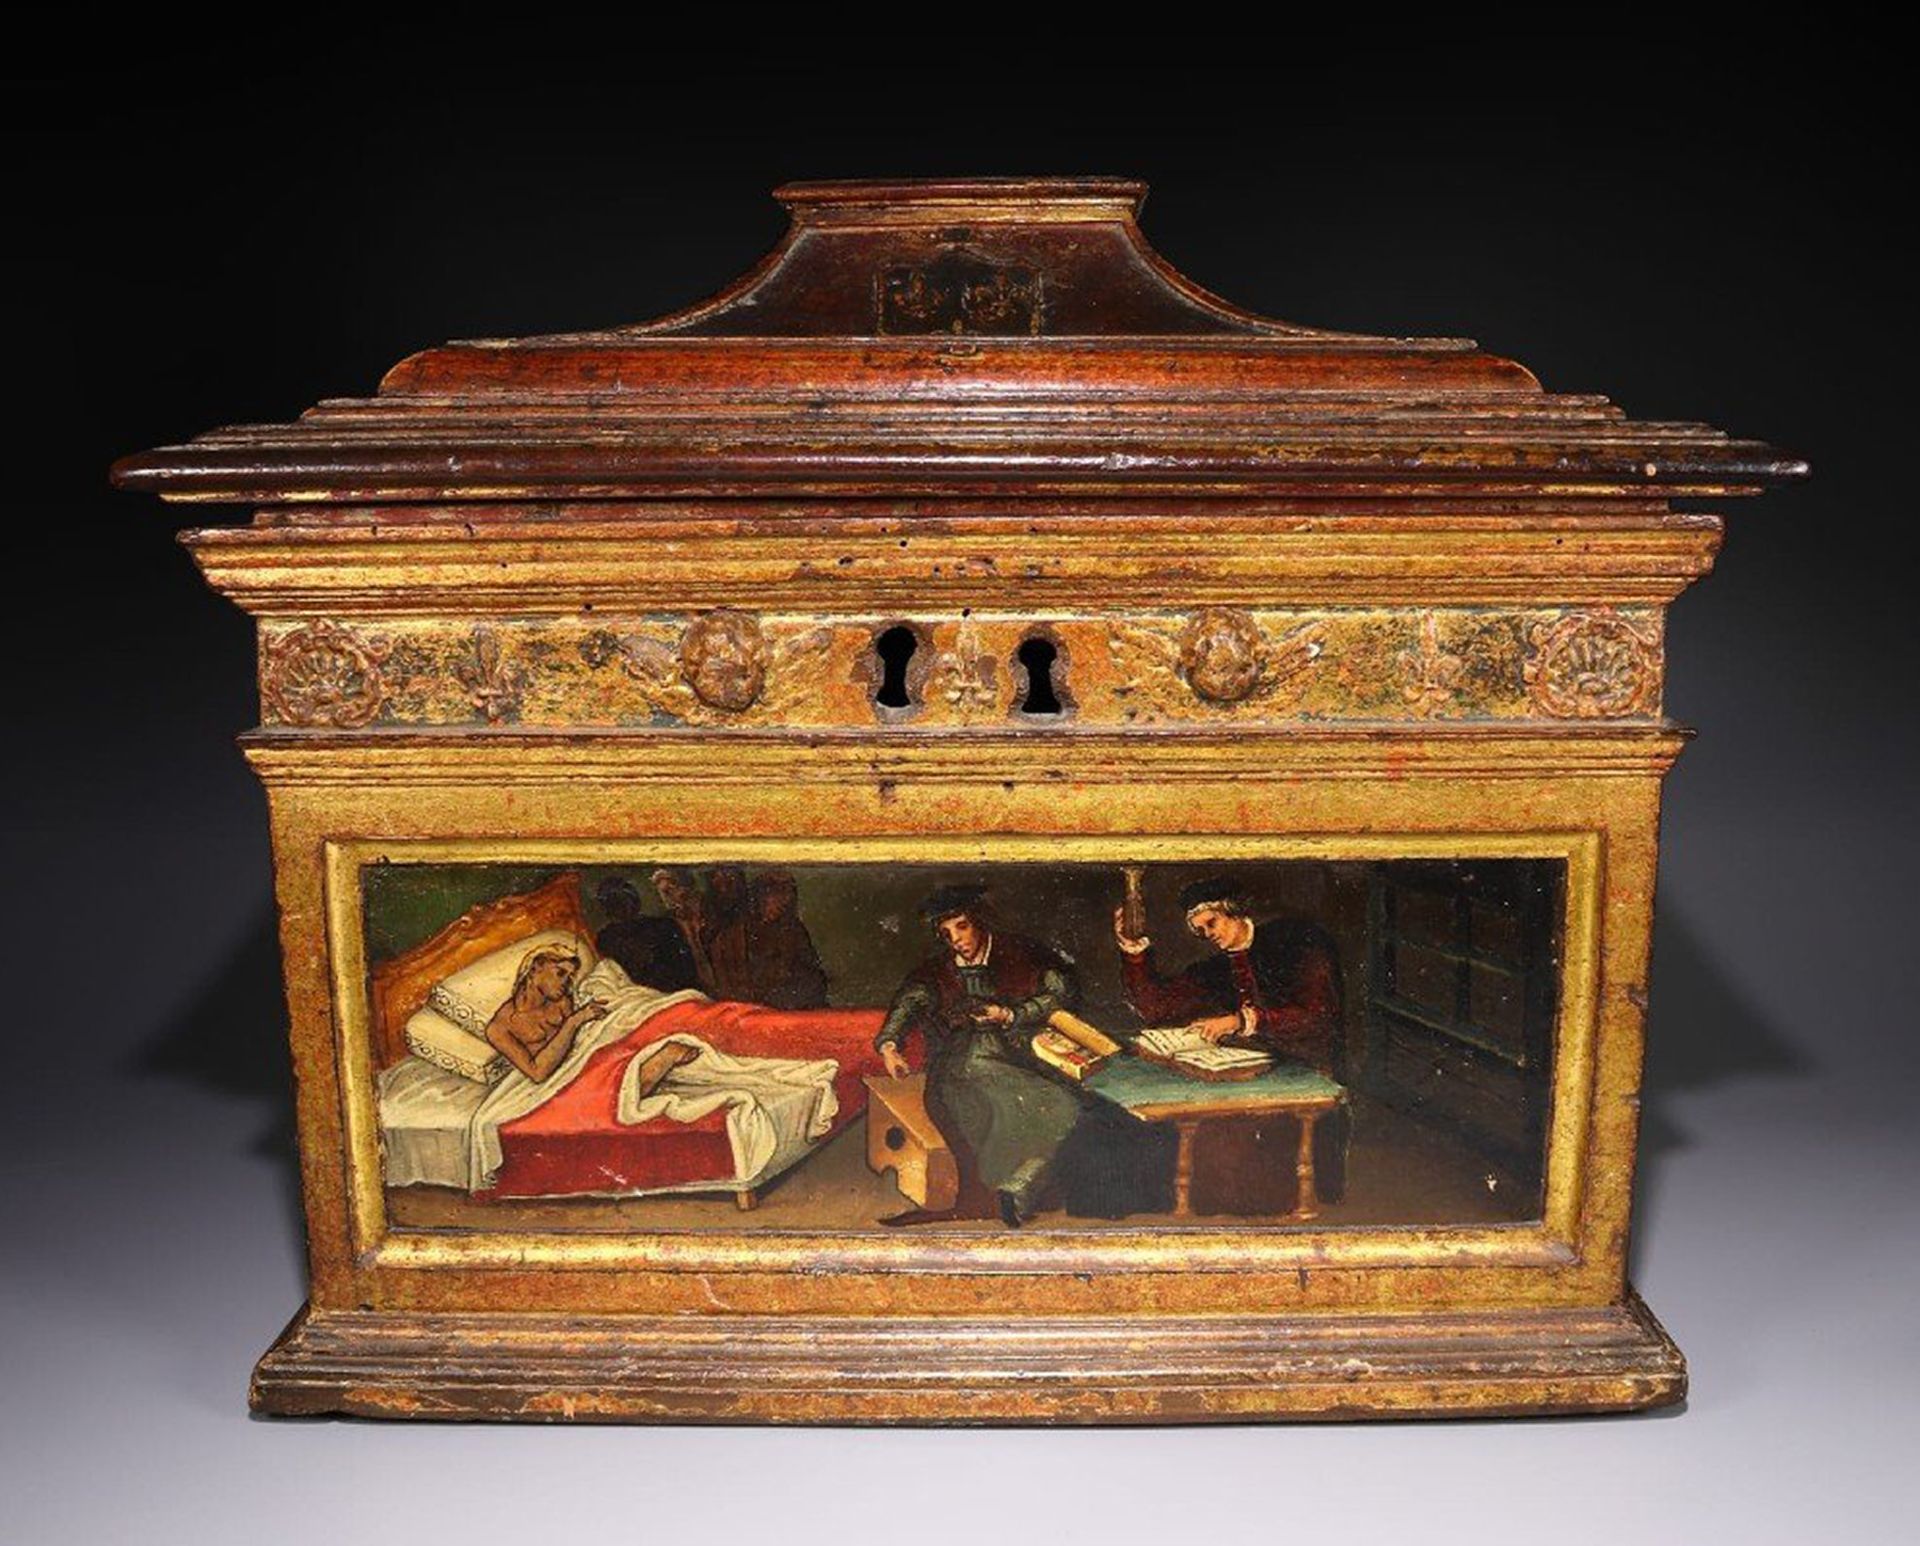 Rare Italian Medical Chest of the Renaissance, Milan or Vizcaya, made by the house of Medinaceli, he - Image 4 of 10